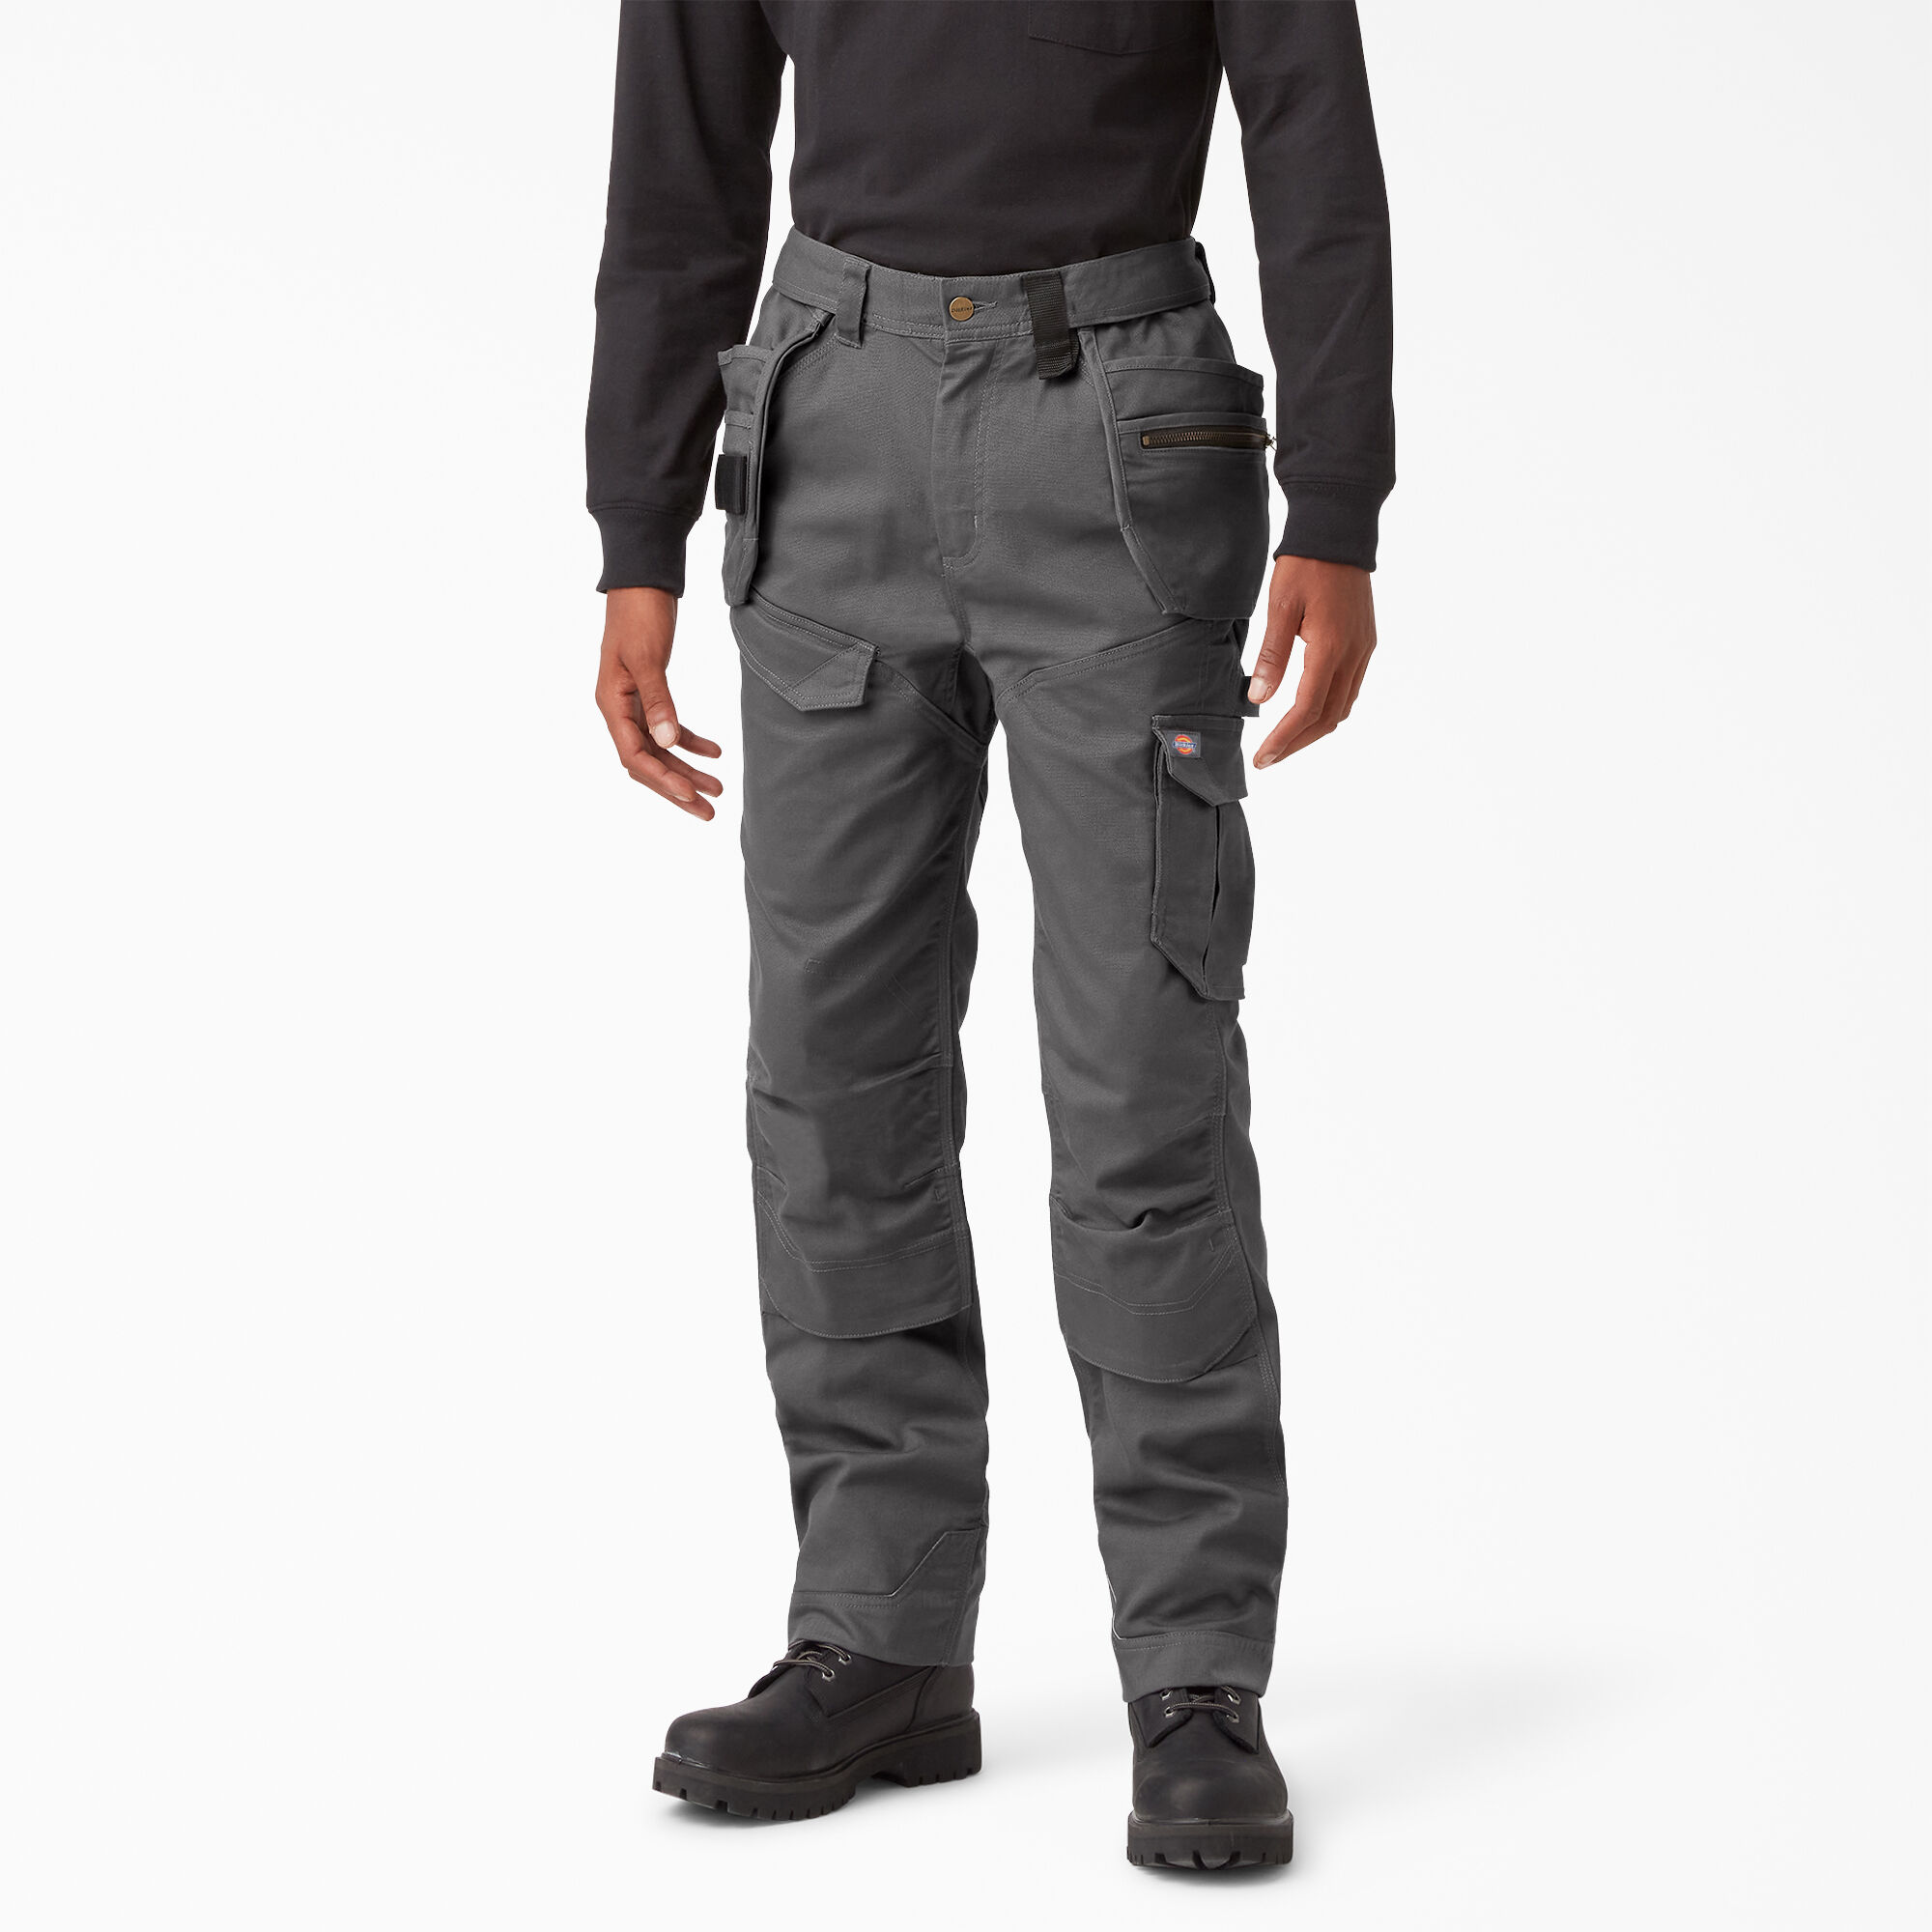 Dickies Redhawk Chino Cargo Combat Trousers Black or Navy Mens Workwear WD803 